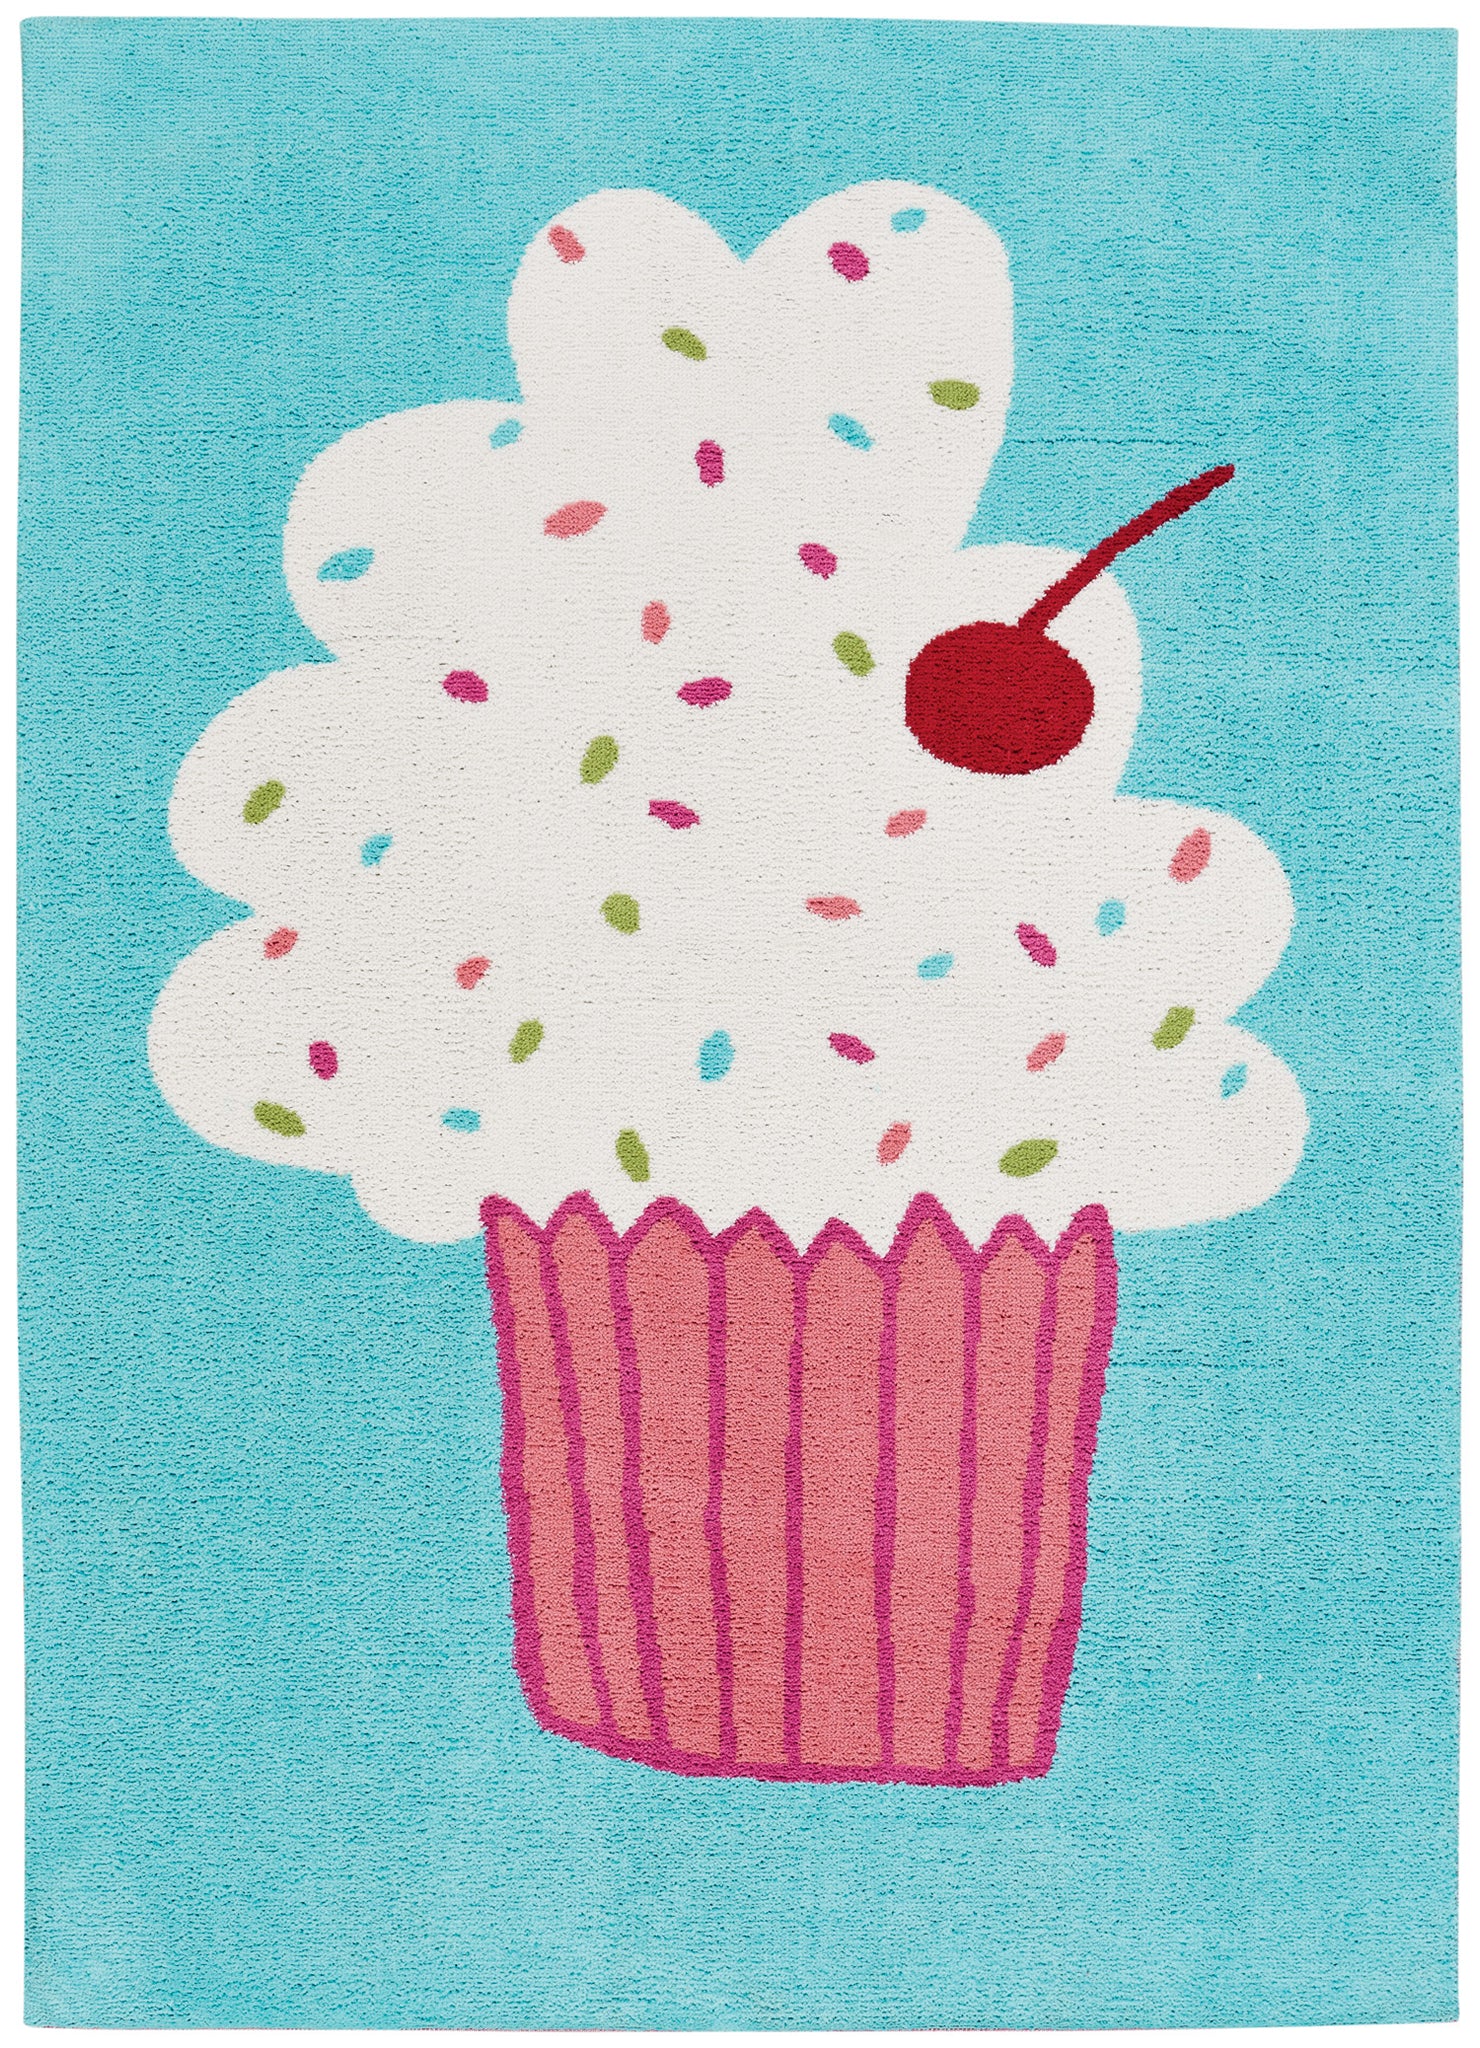 Capel Confectionary Cake Pops 6303 Seaway 245 Area Rug by Hable Construction main image